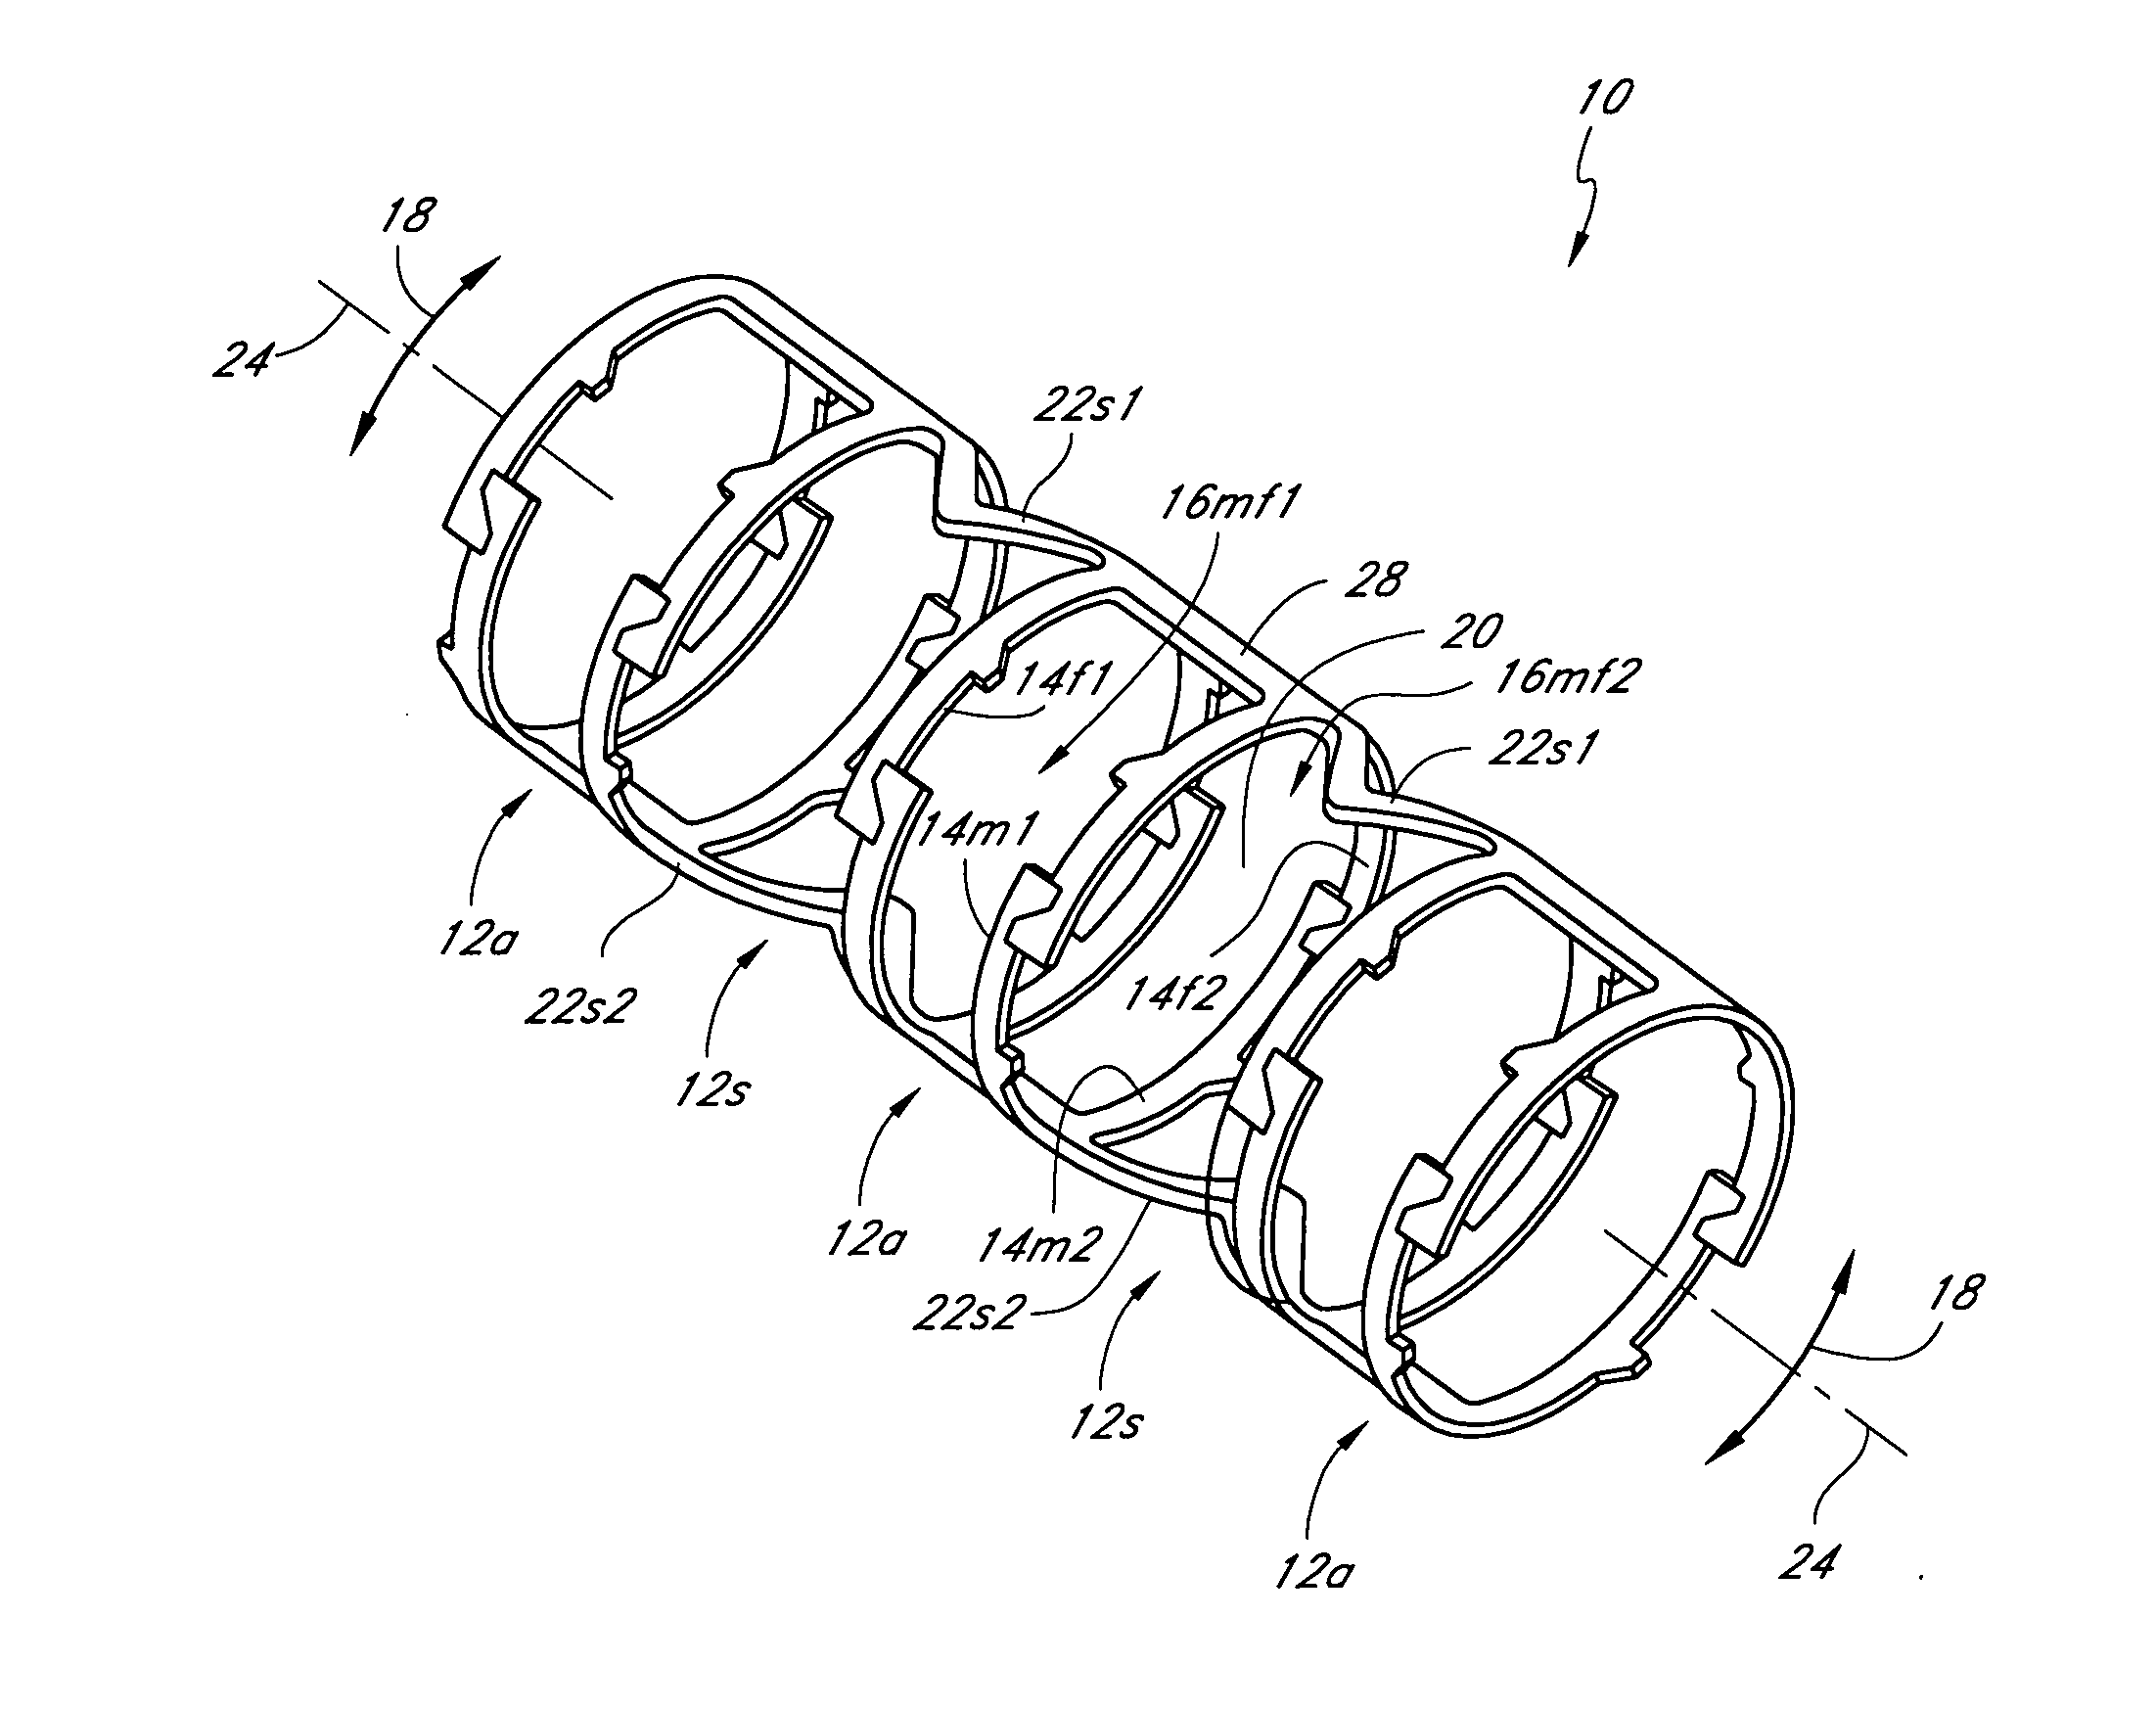 Axially nested slide and lock expandable device